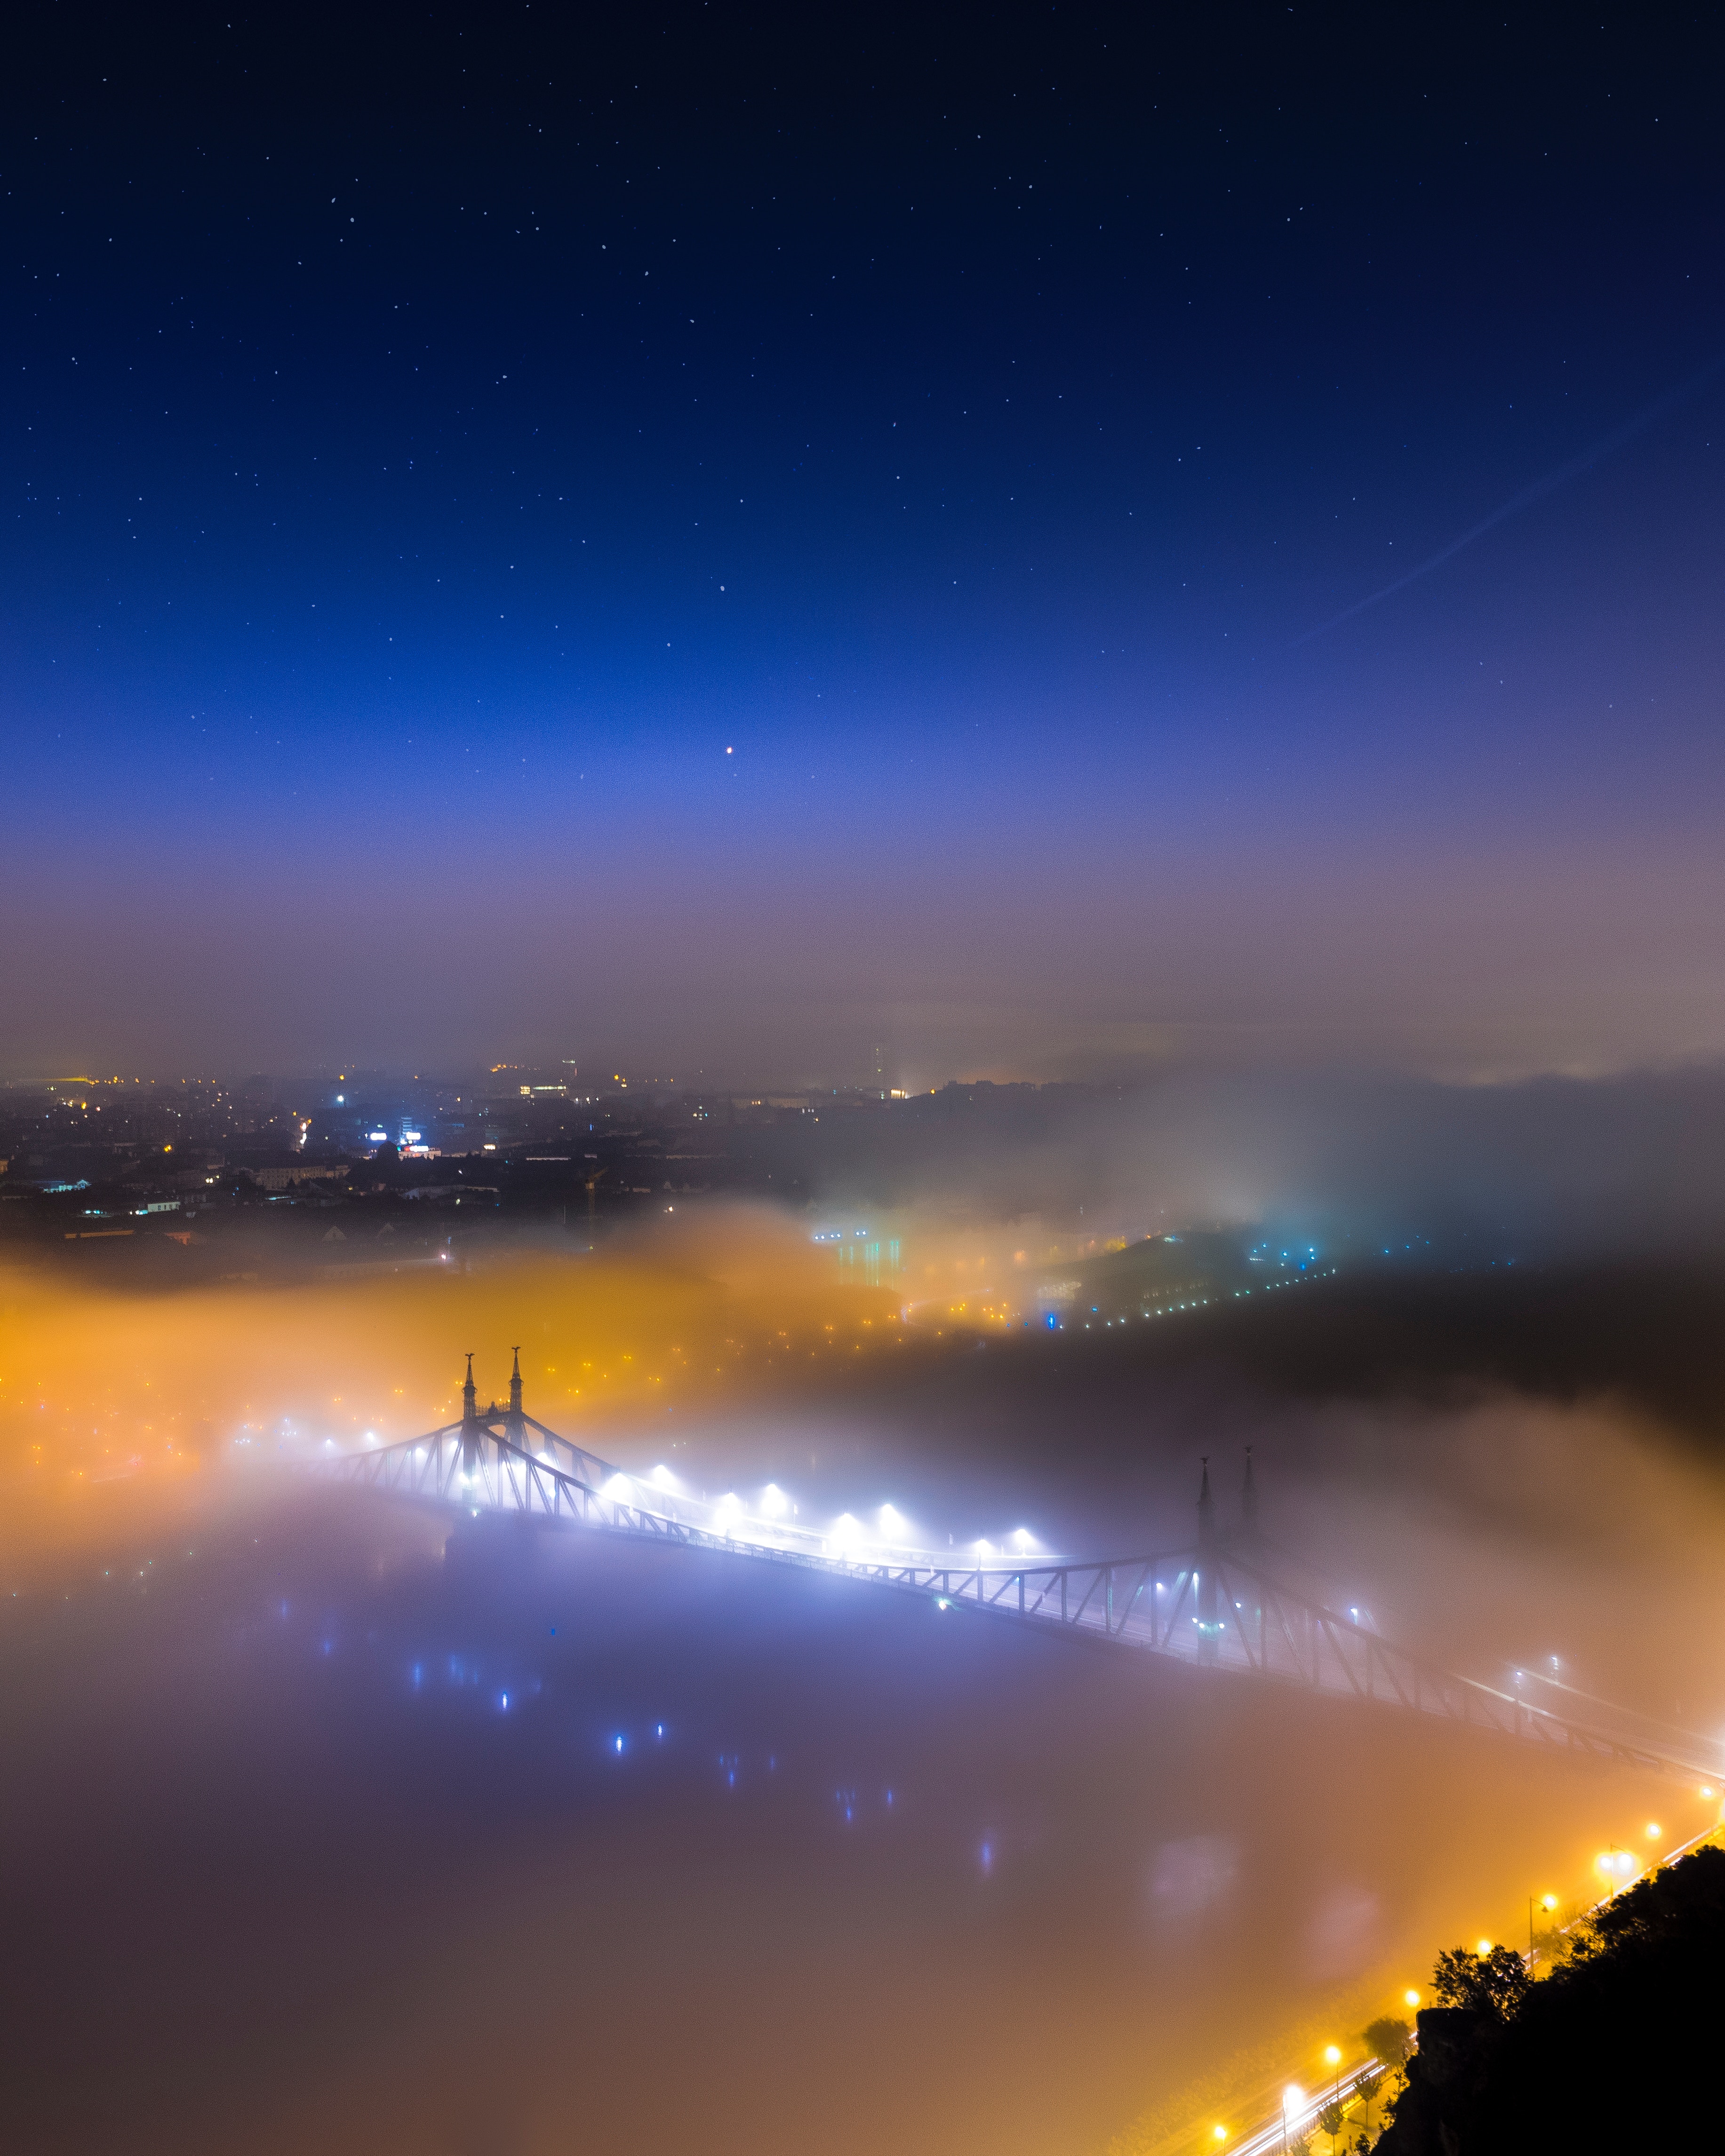 budapest, nature, view from above, fog, night city, bridge, hungary wallpaper for mobile